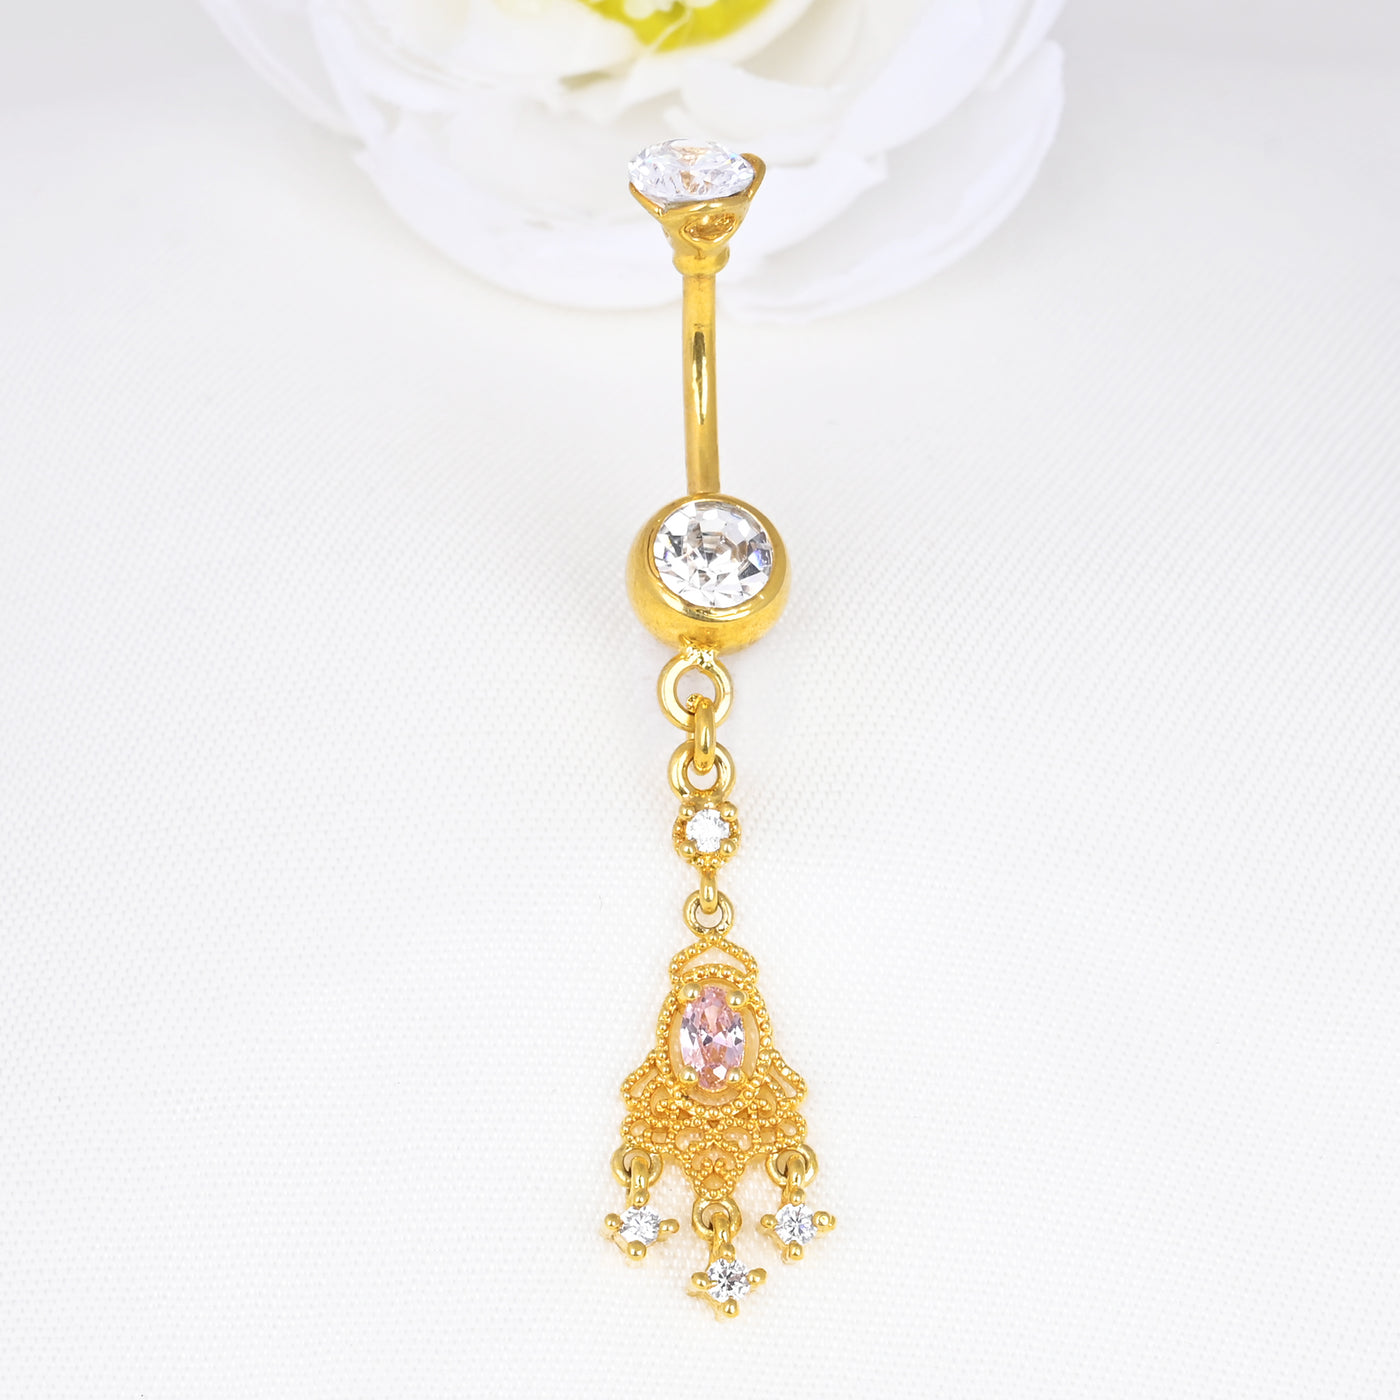 Chandelier Styled Dangling Belly Piercing Ring